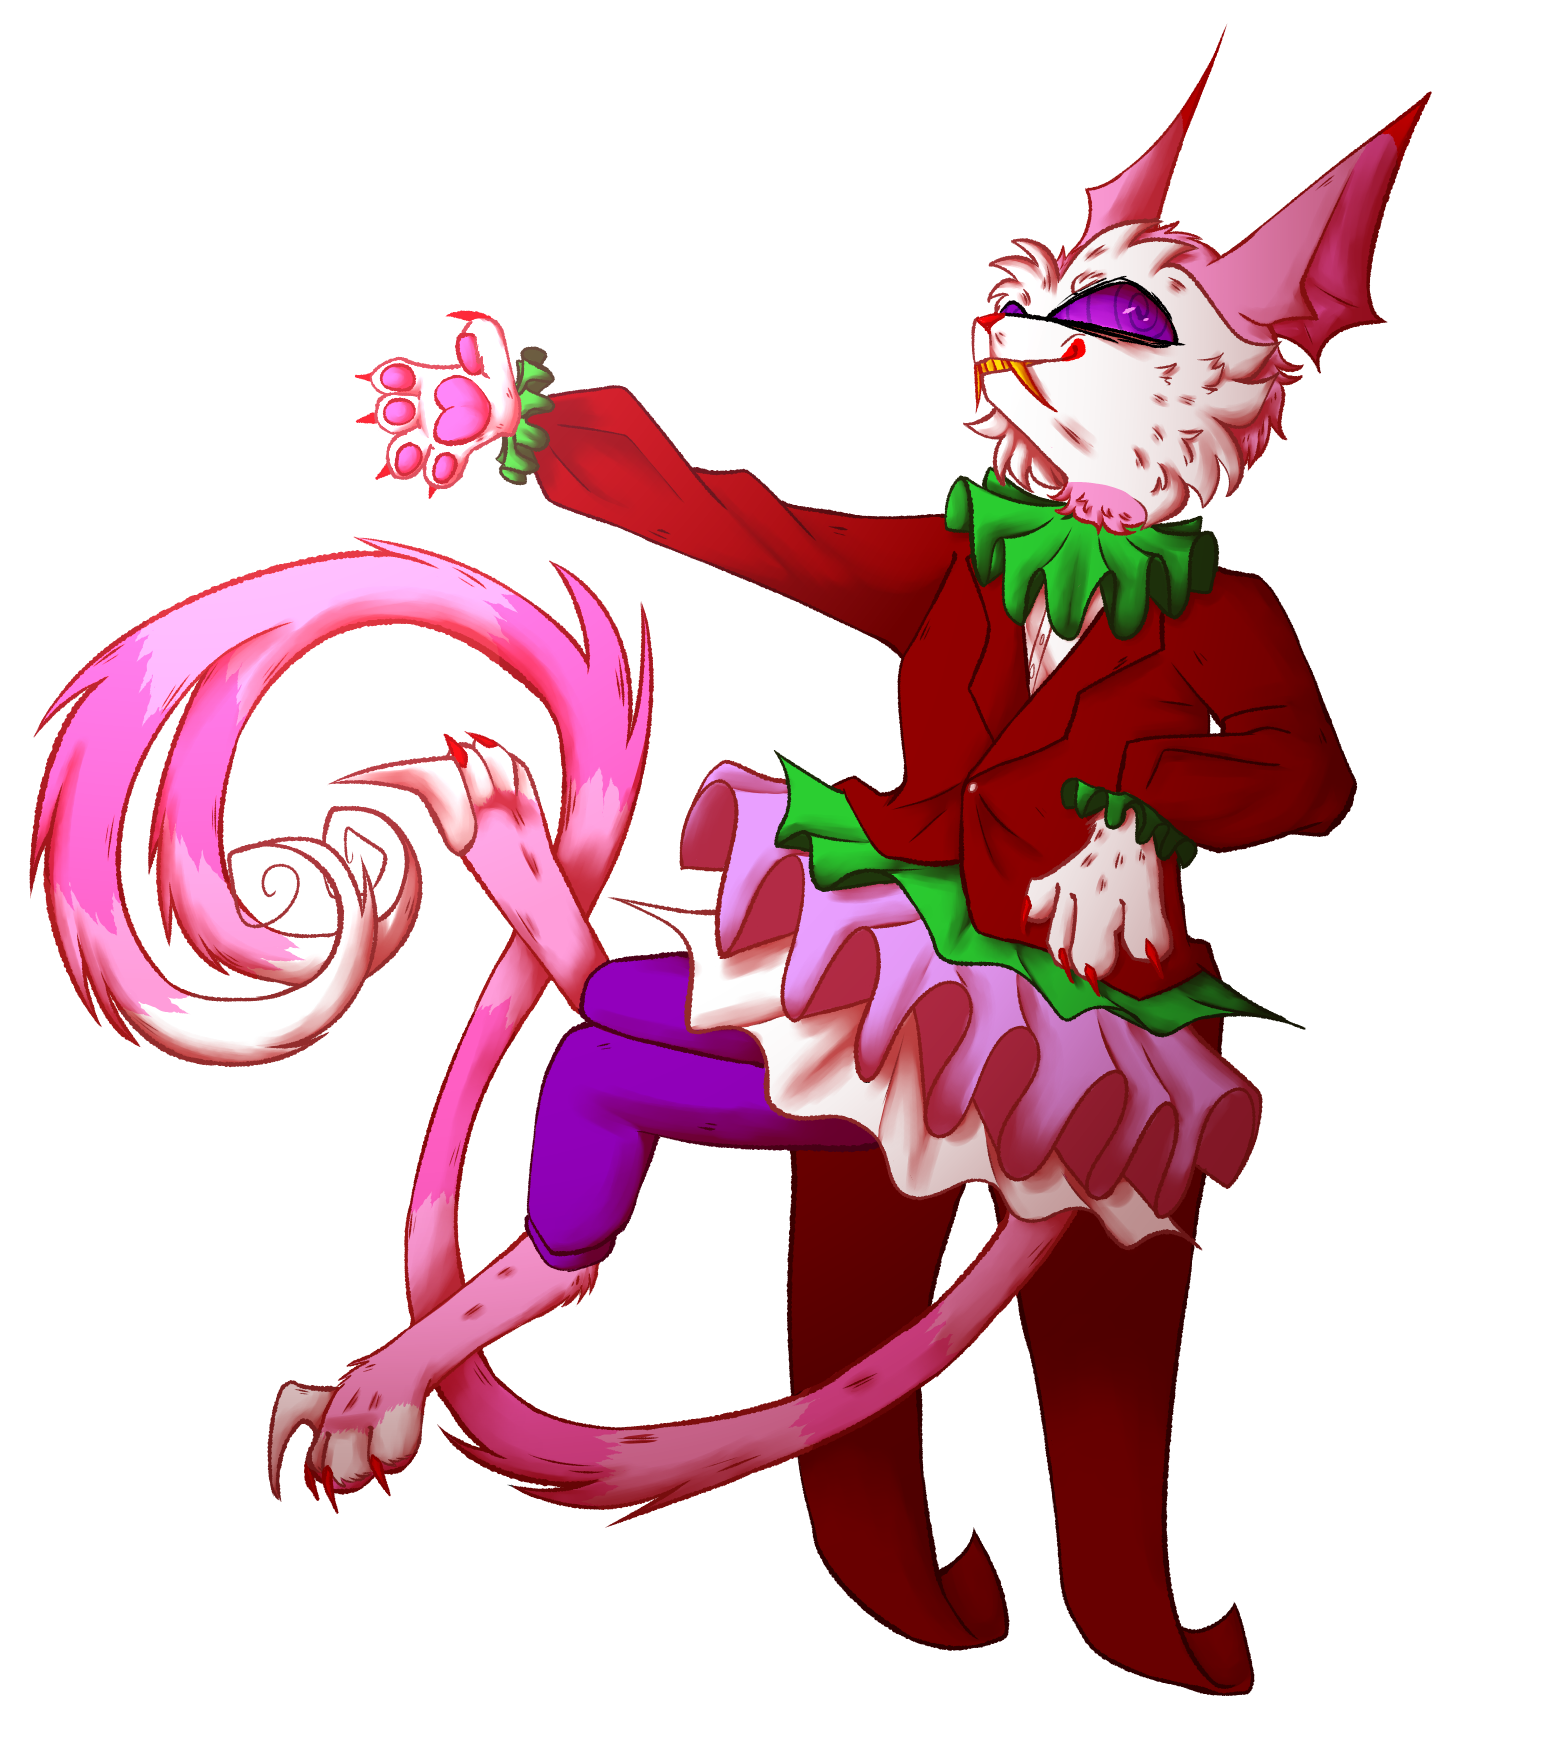 a transparent digital drawing of a pink creature wearing a clown outfit. one leg is crossed over the other and one arm is propped up against an invisible ledge. the other arm is stretched out.